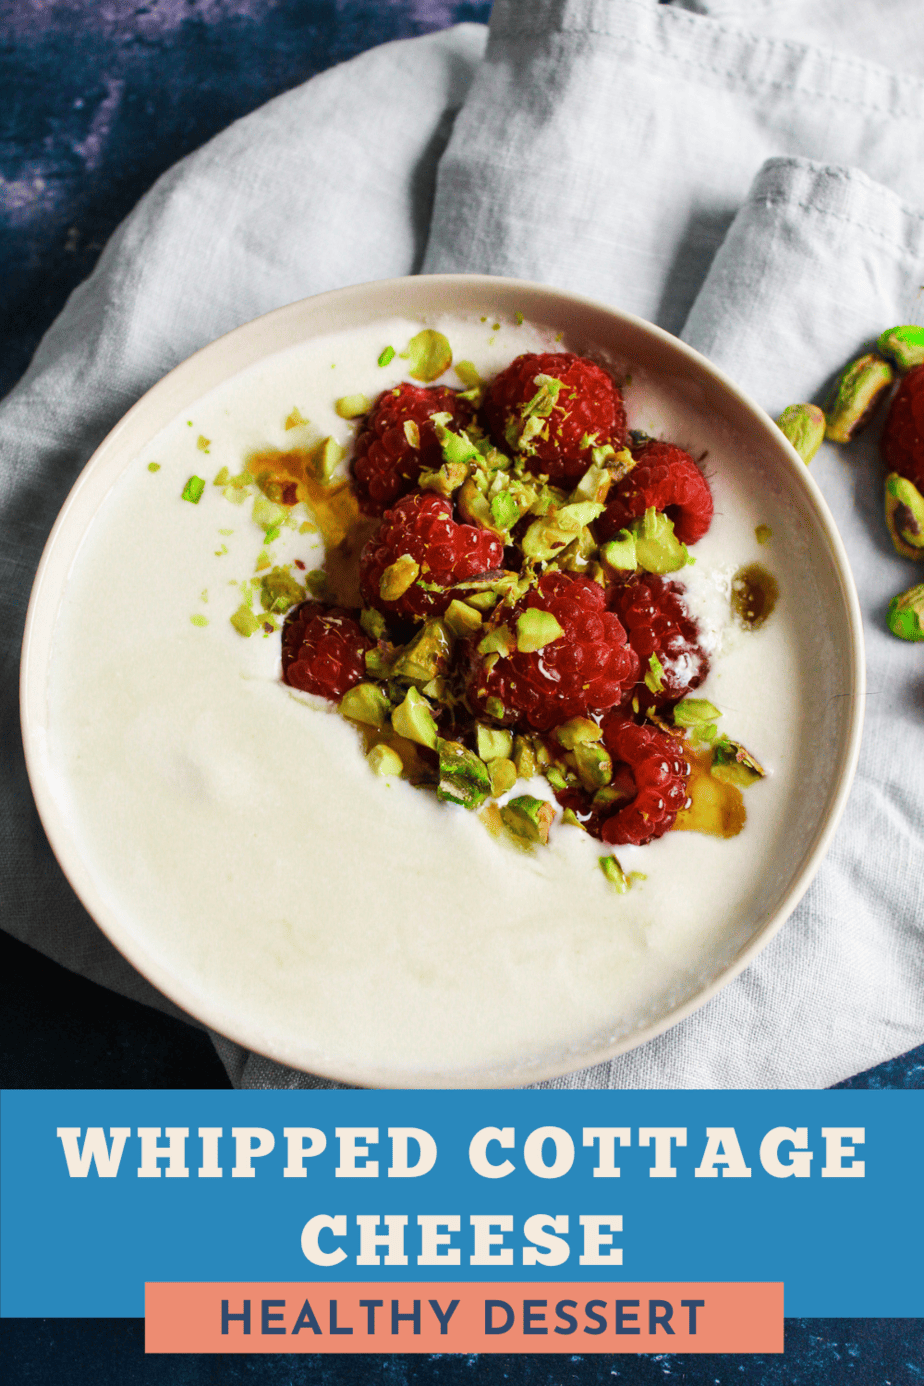 Whipped Cottage Cheese Dessert